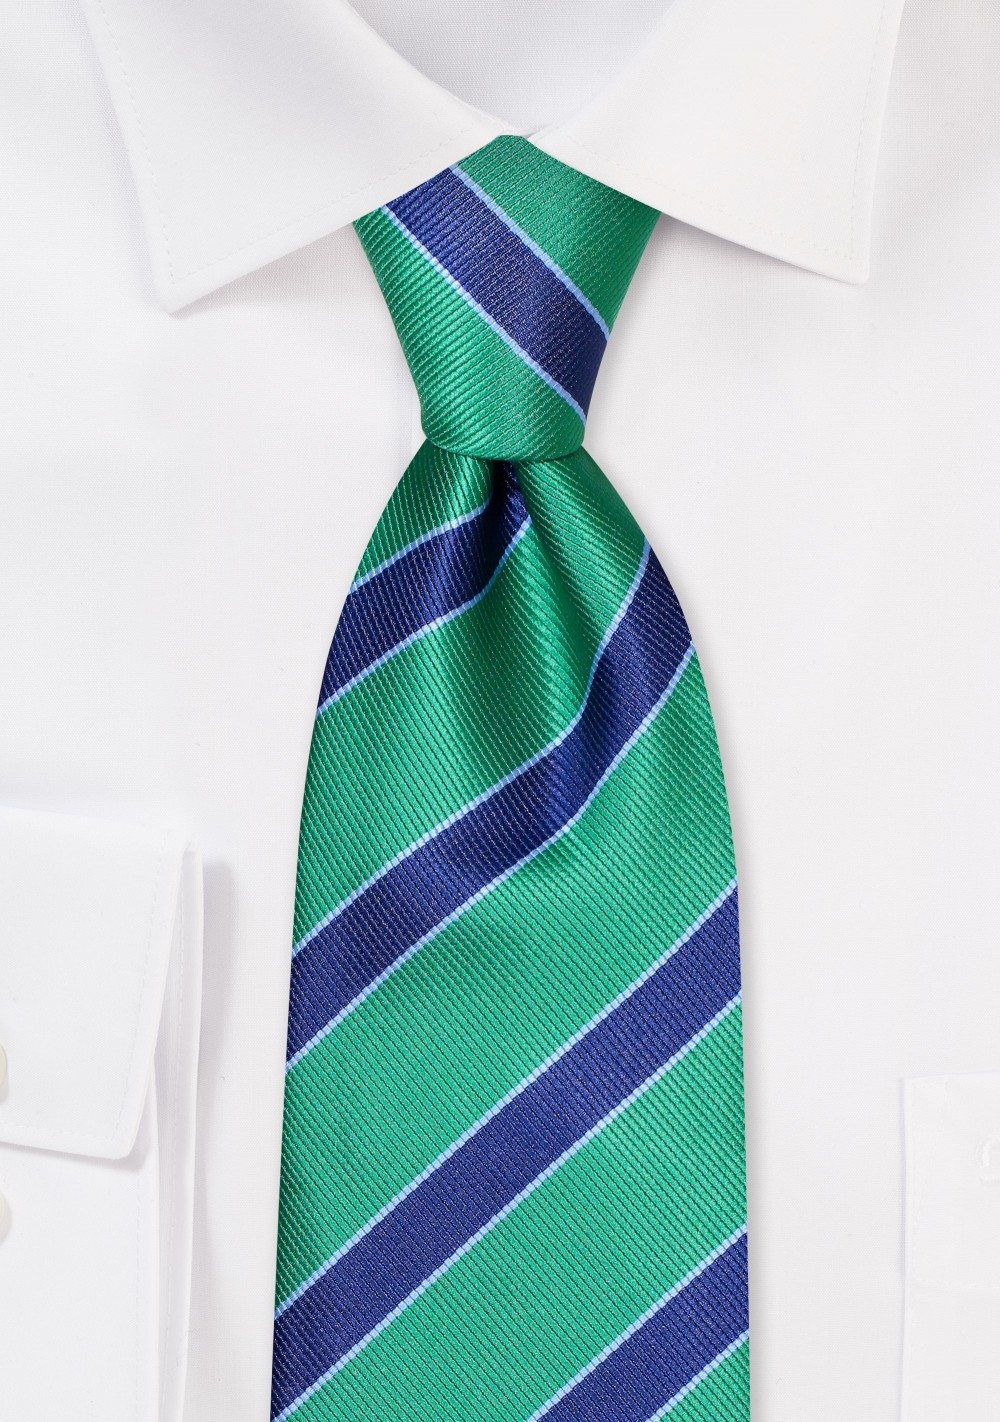 Kelly Green and Navy Repp Striped Tie